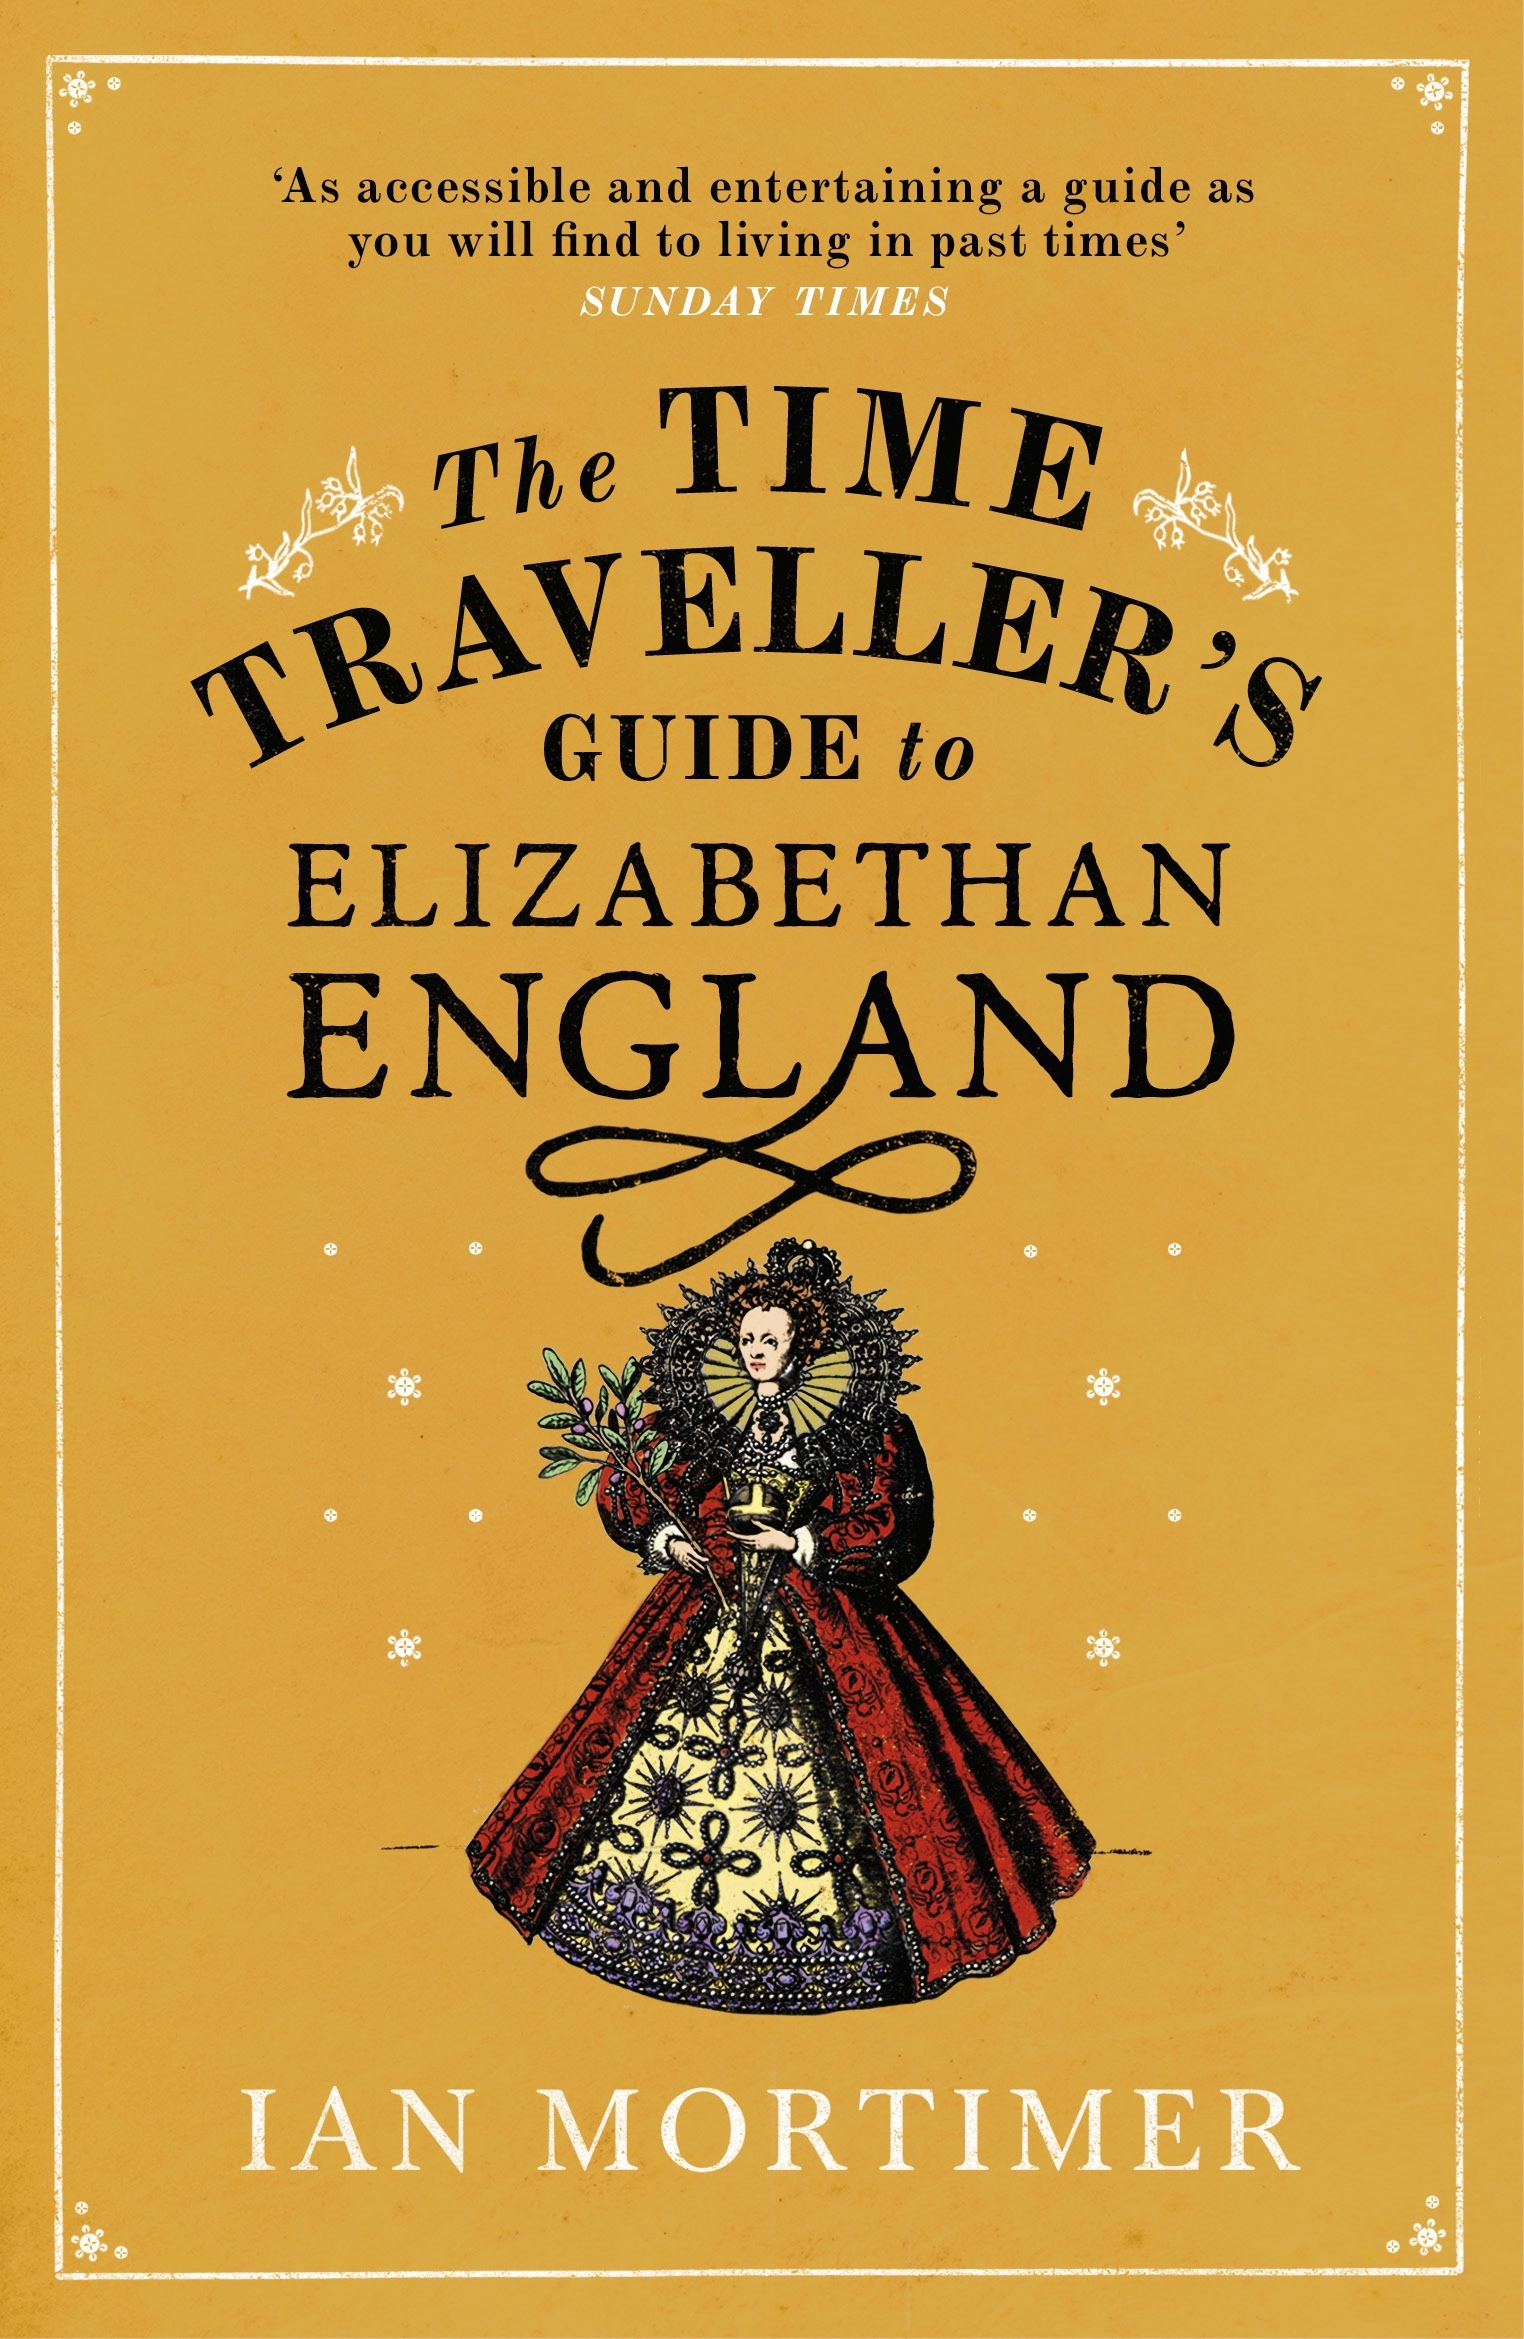 time traveller's guide to medieval england pdf